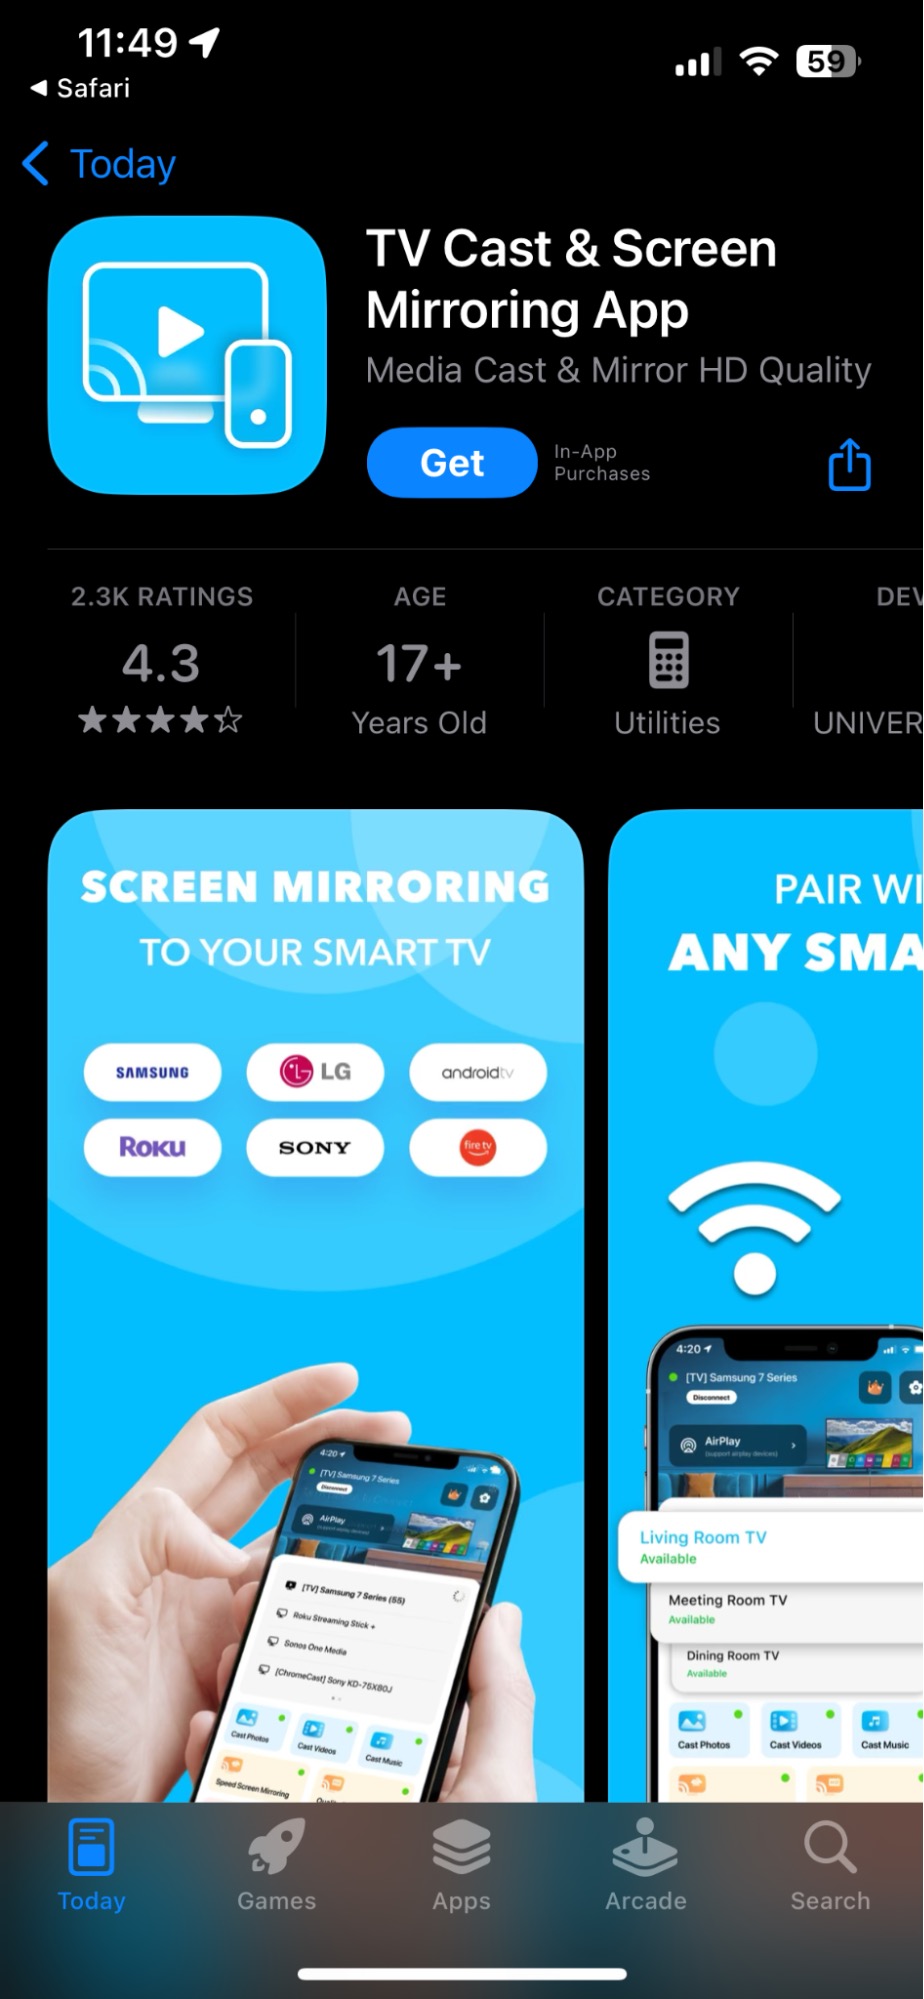 Download the TV Cast & Screen Mirroring App from the App Store on iPhone